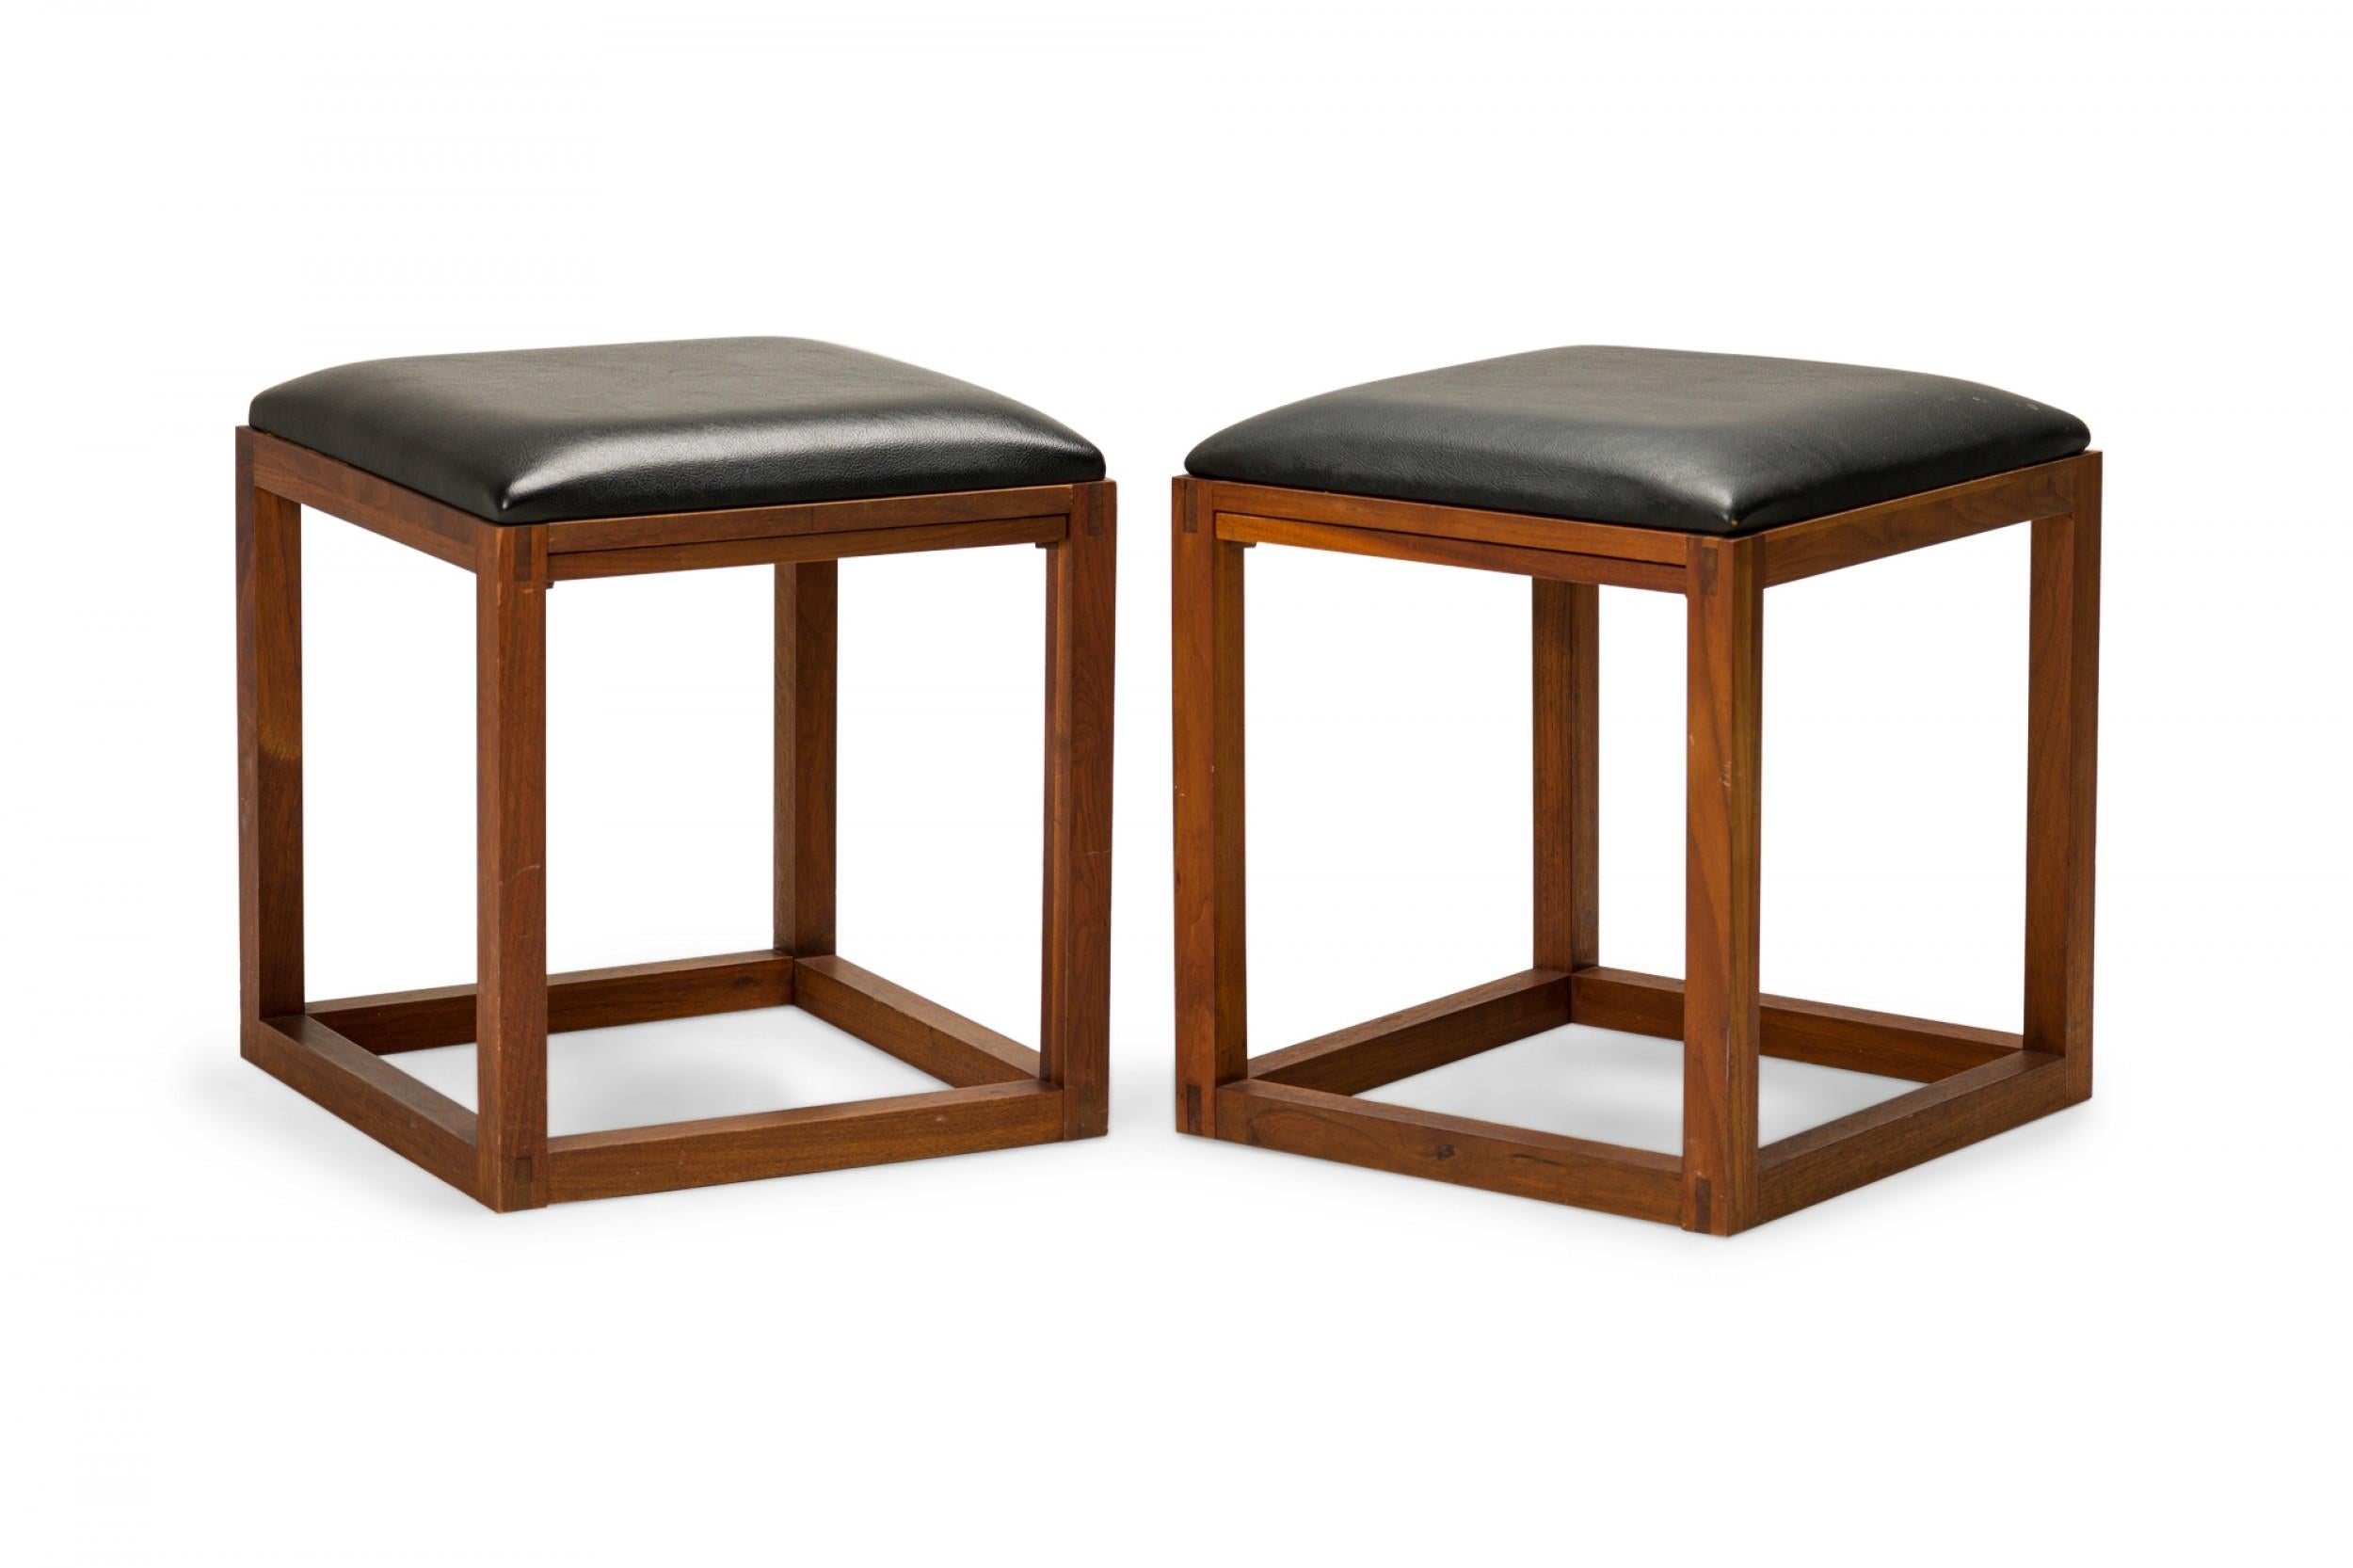 Pair of Tony Paul Black Leather Upholstered Wooden Cube Stool with Slide Tray